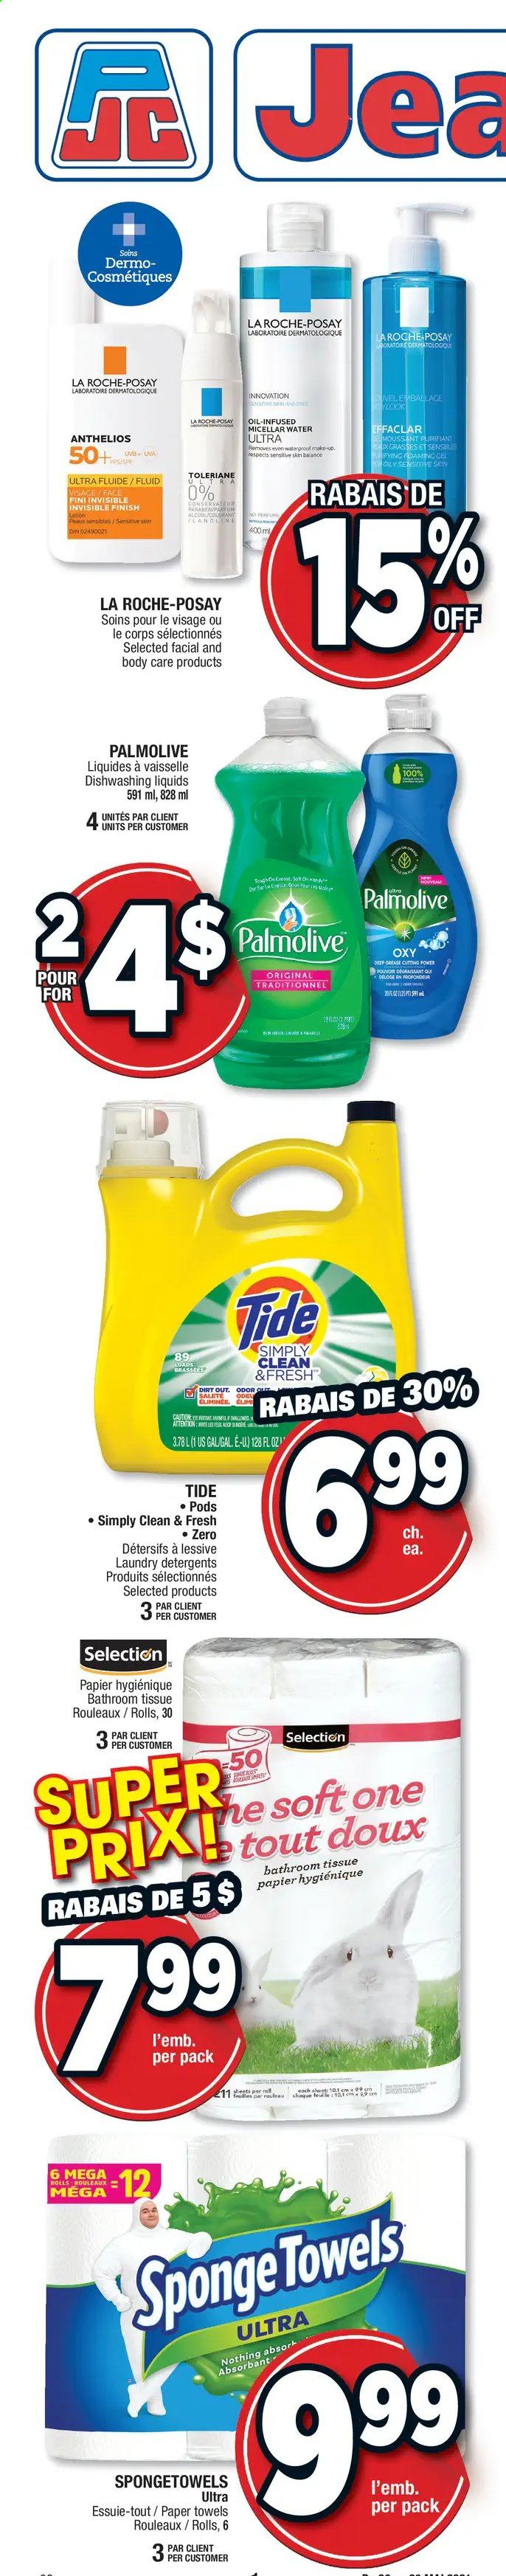 thumbnail - Jean Coutu Flyer - May 20, 2021 - May 26, 2021 - Sales products - oil, bath tissue, kitchen towels, paper towels, Tide, Palmolive, La Roche-Posay, micellar water, makeup, sponge. Page 10.